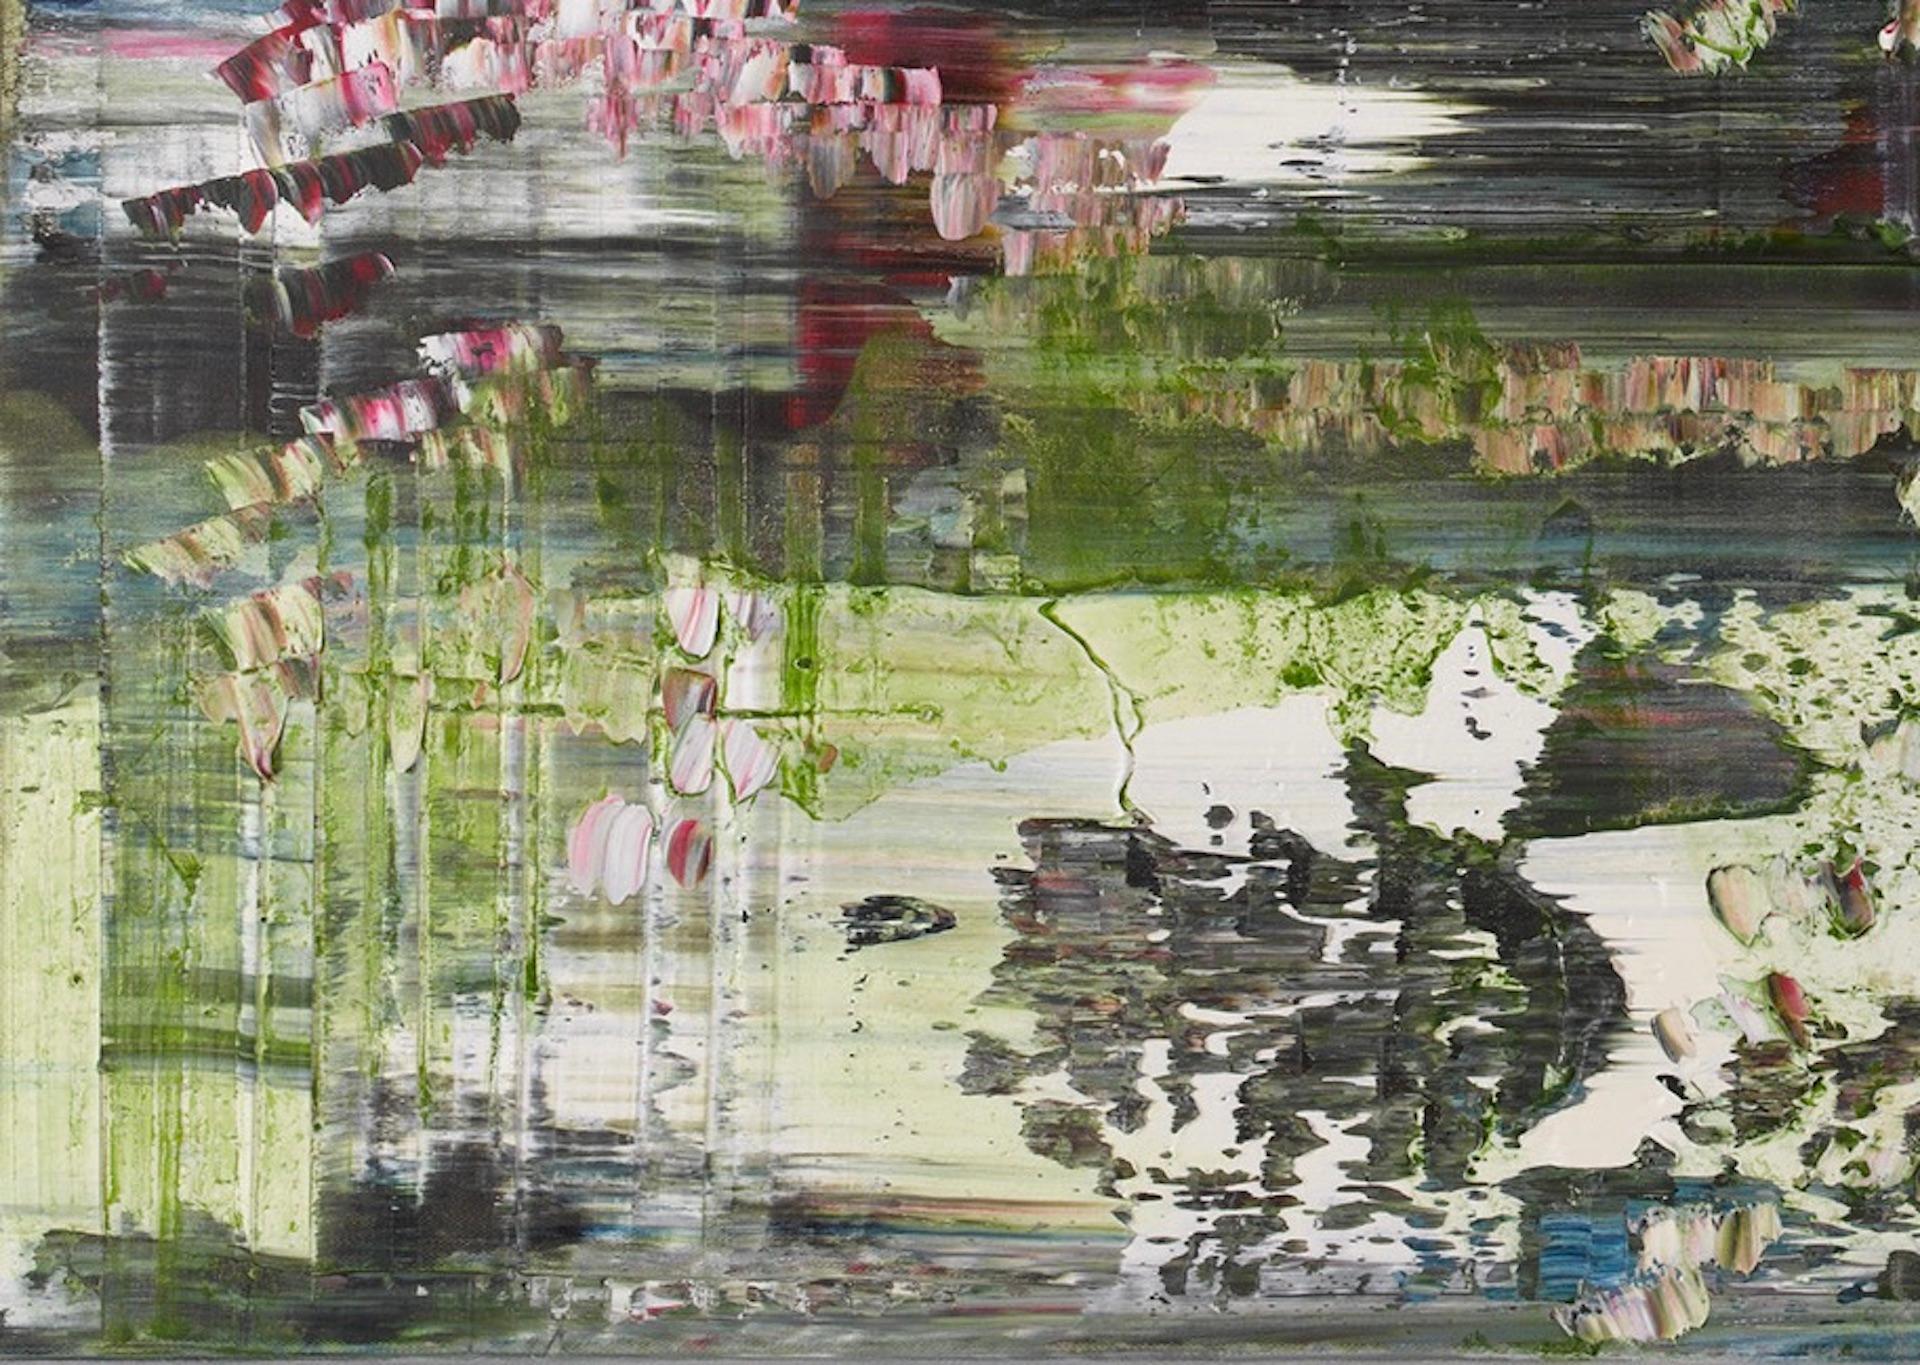 'Flower Filled Water' by British artist Jessica Zoob is evocative of Asia where she has spent so much of her time in recent years. It also pays homage to Monet's water lilies and her own English garden. Even when there are storms in evidence,